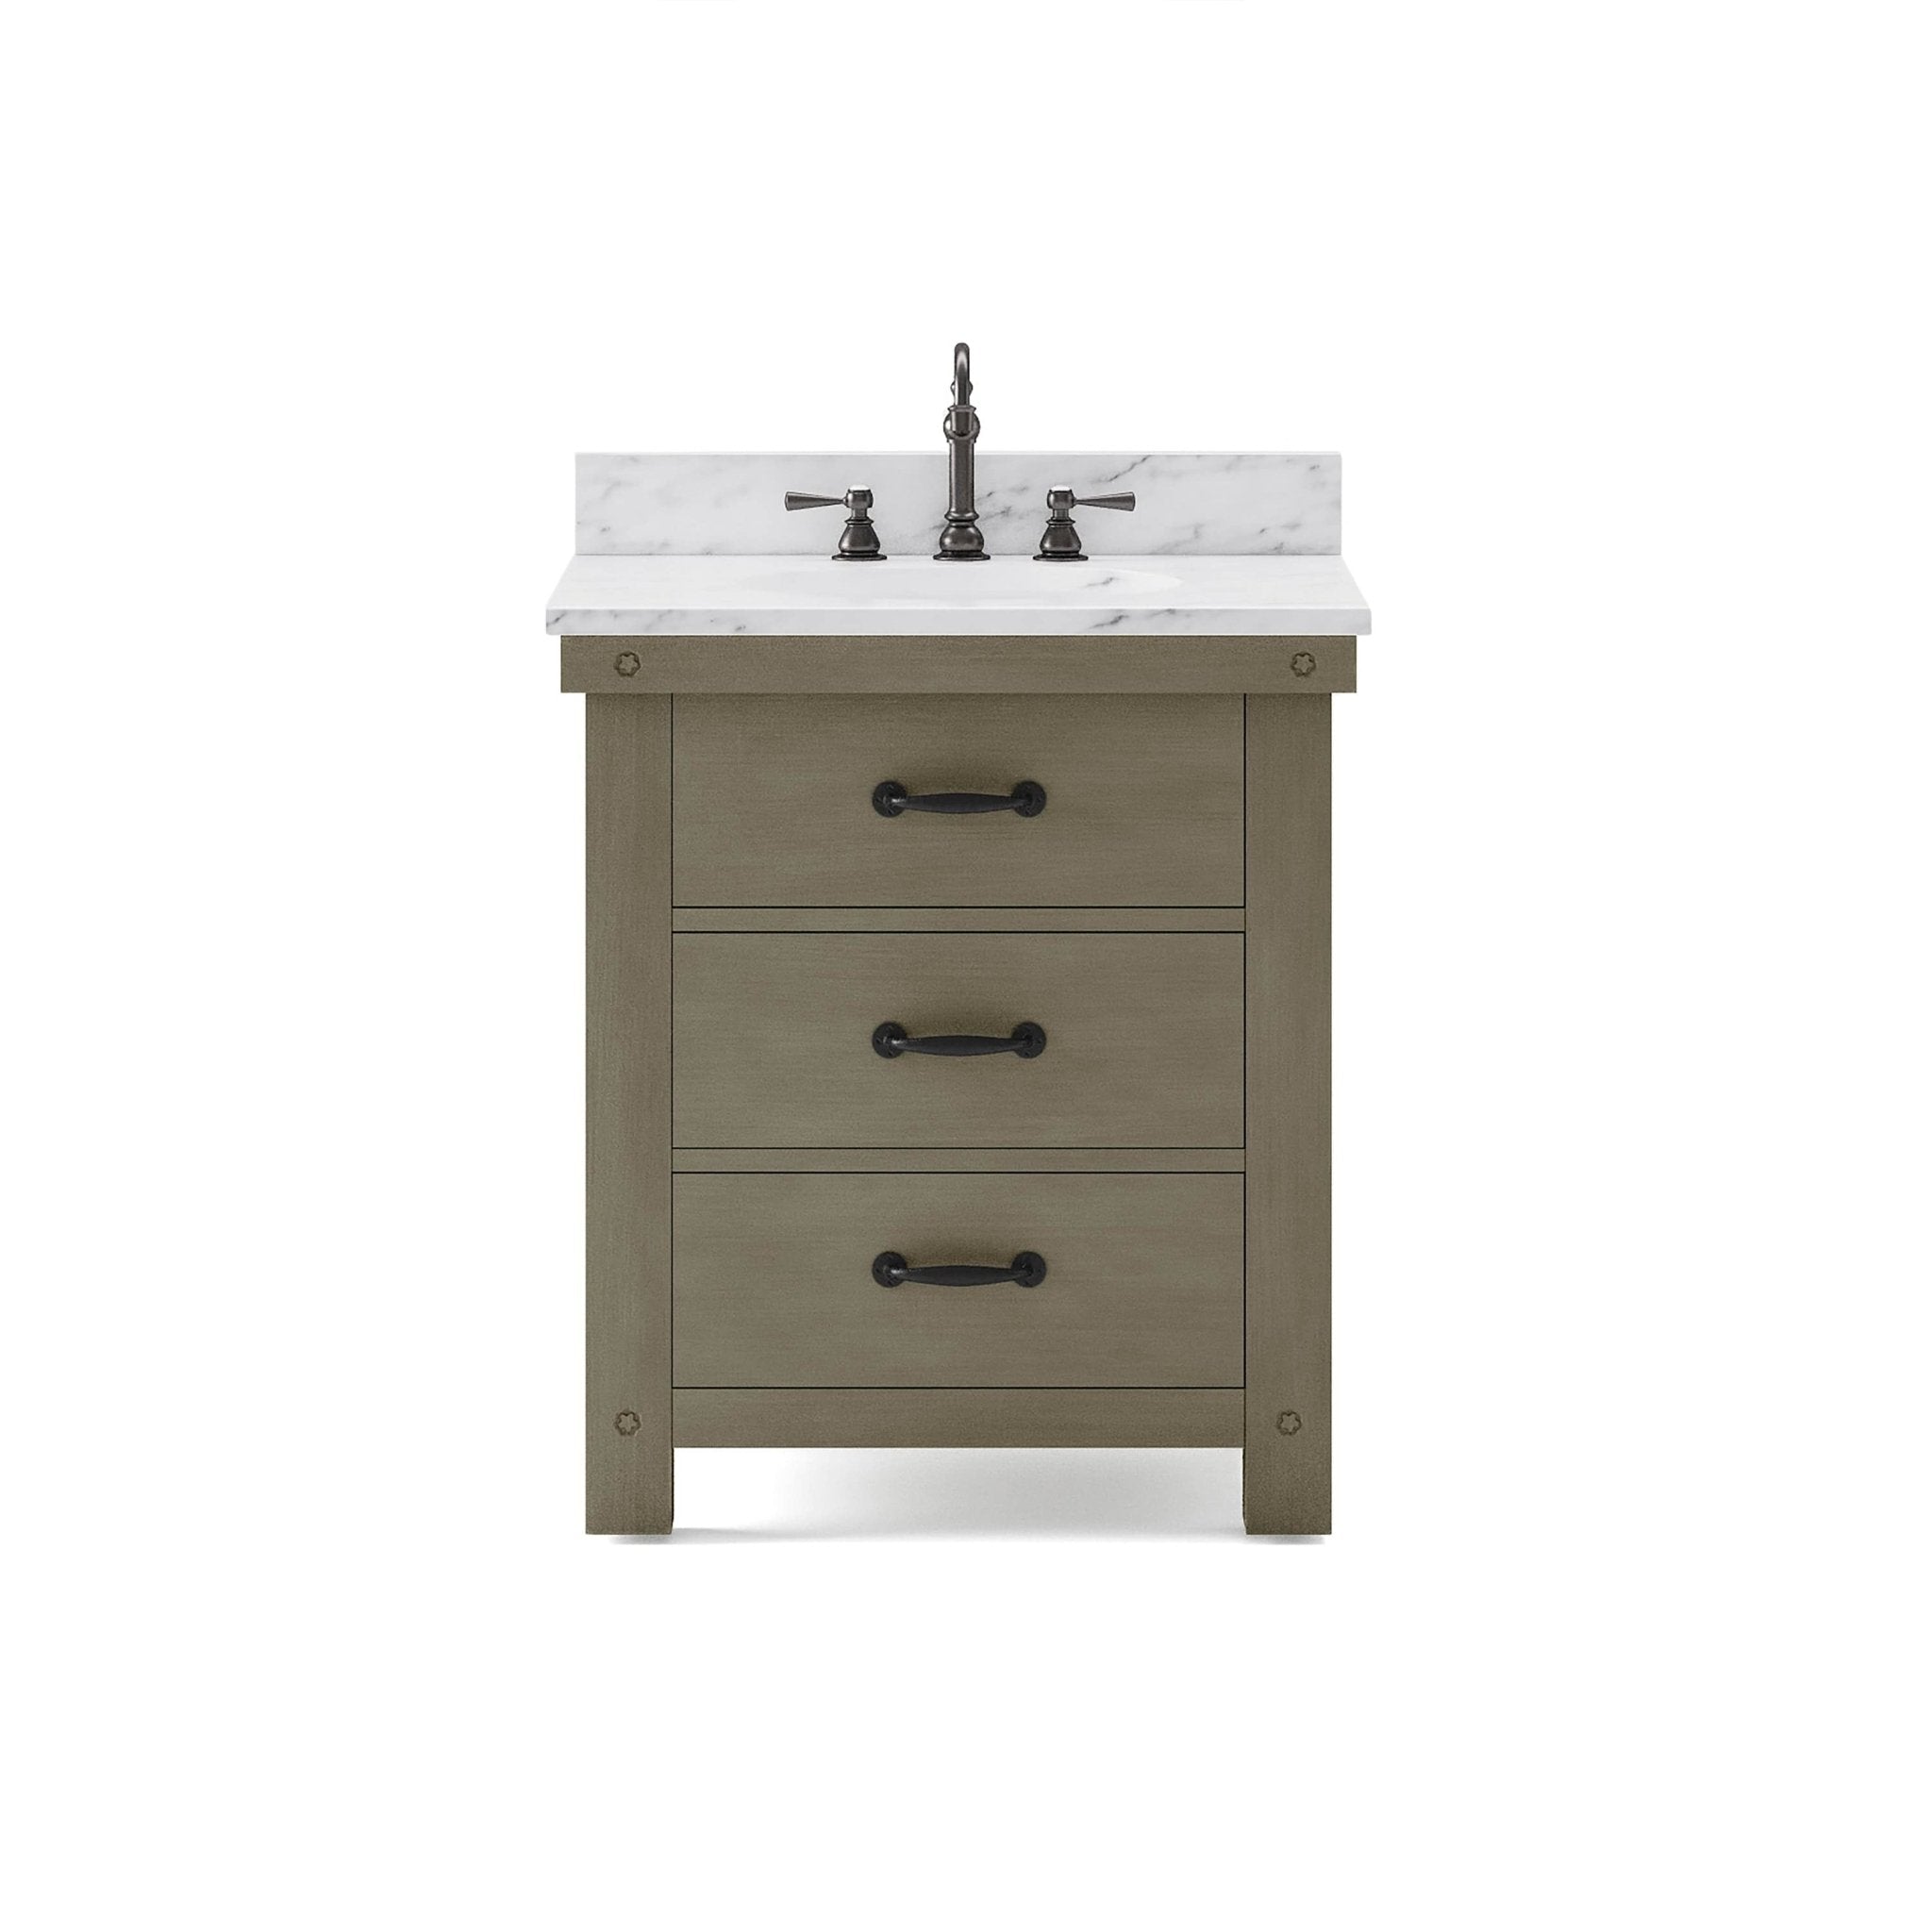 30 Inch Grizzle Grey Single Sink Bathroom Vanity With Carrara White Marble Counter Top From The ABERDEEN Collection - Molaix601946608505Bathroom VanitiesAB30CW03GG-000000000